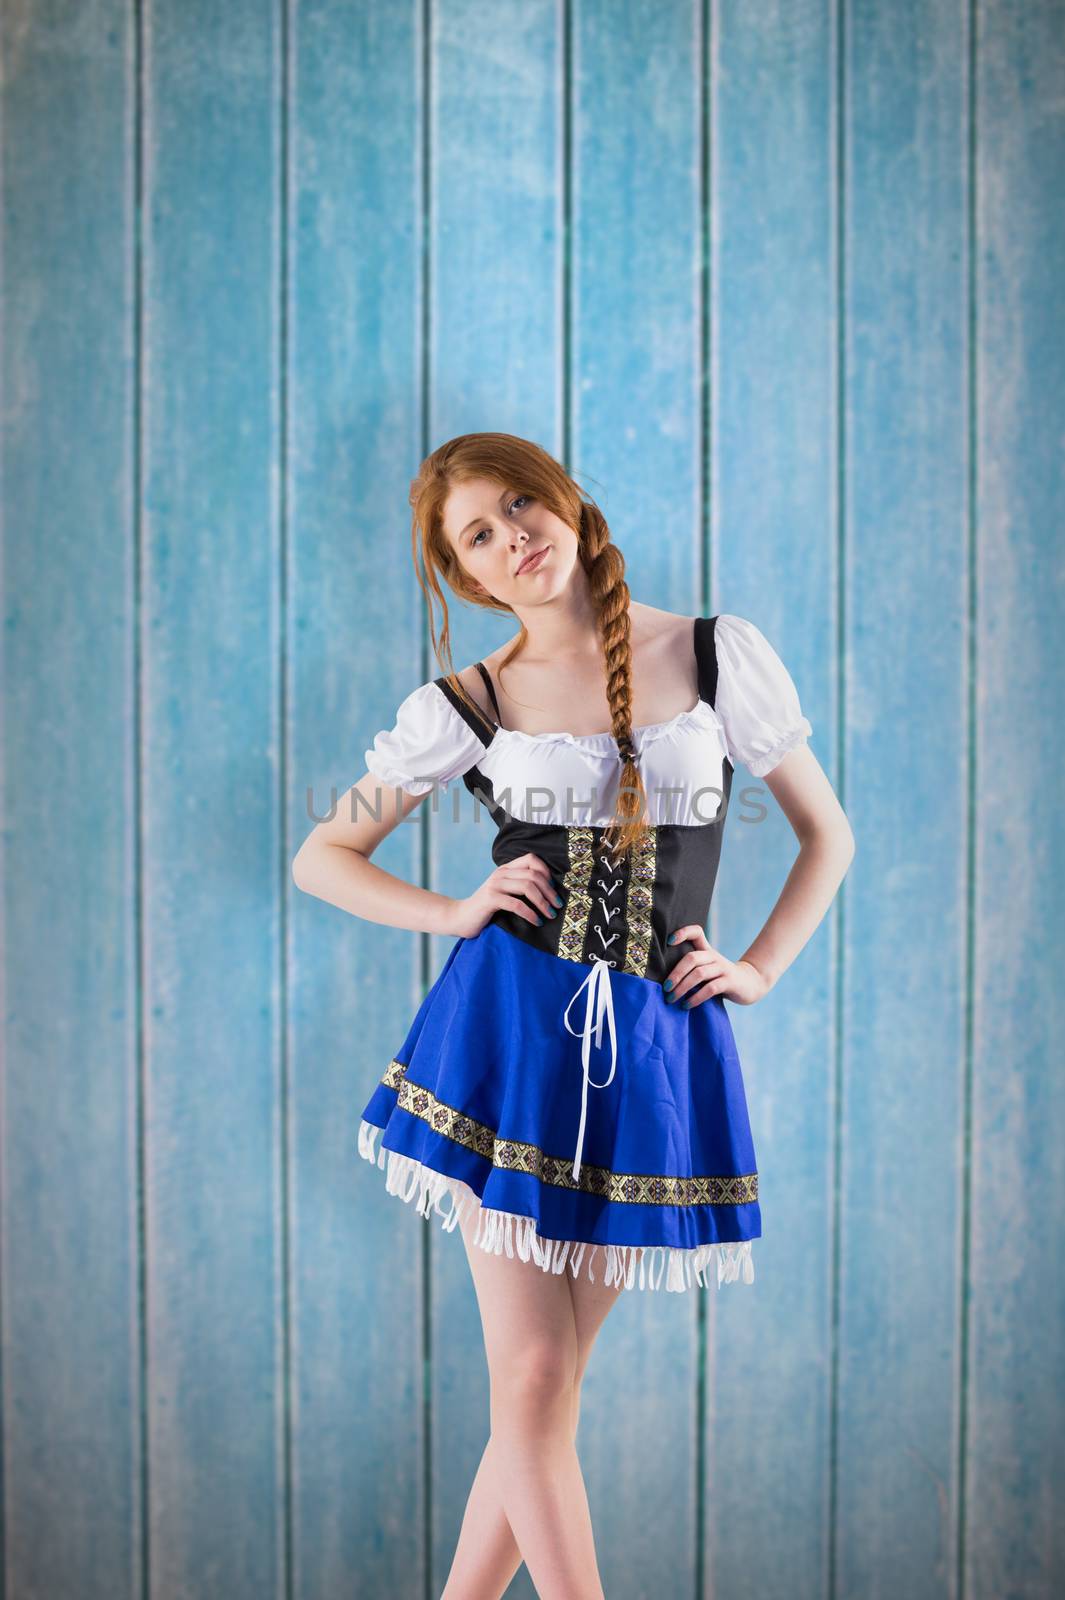 Oktoberfest girl looking at camera against wooden planks